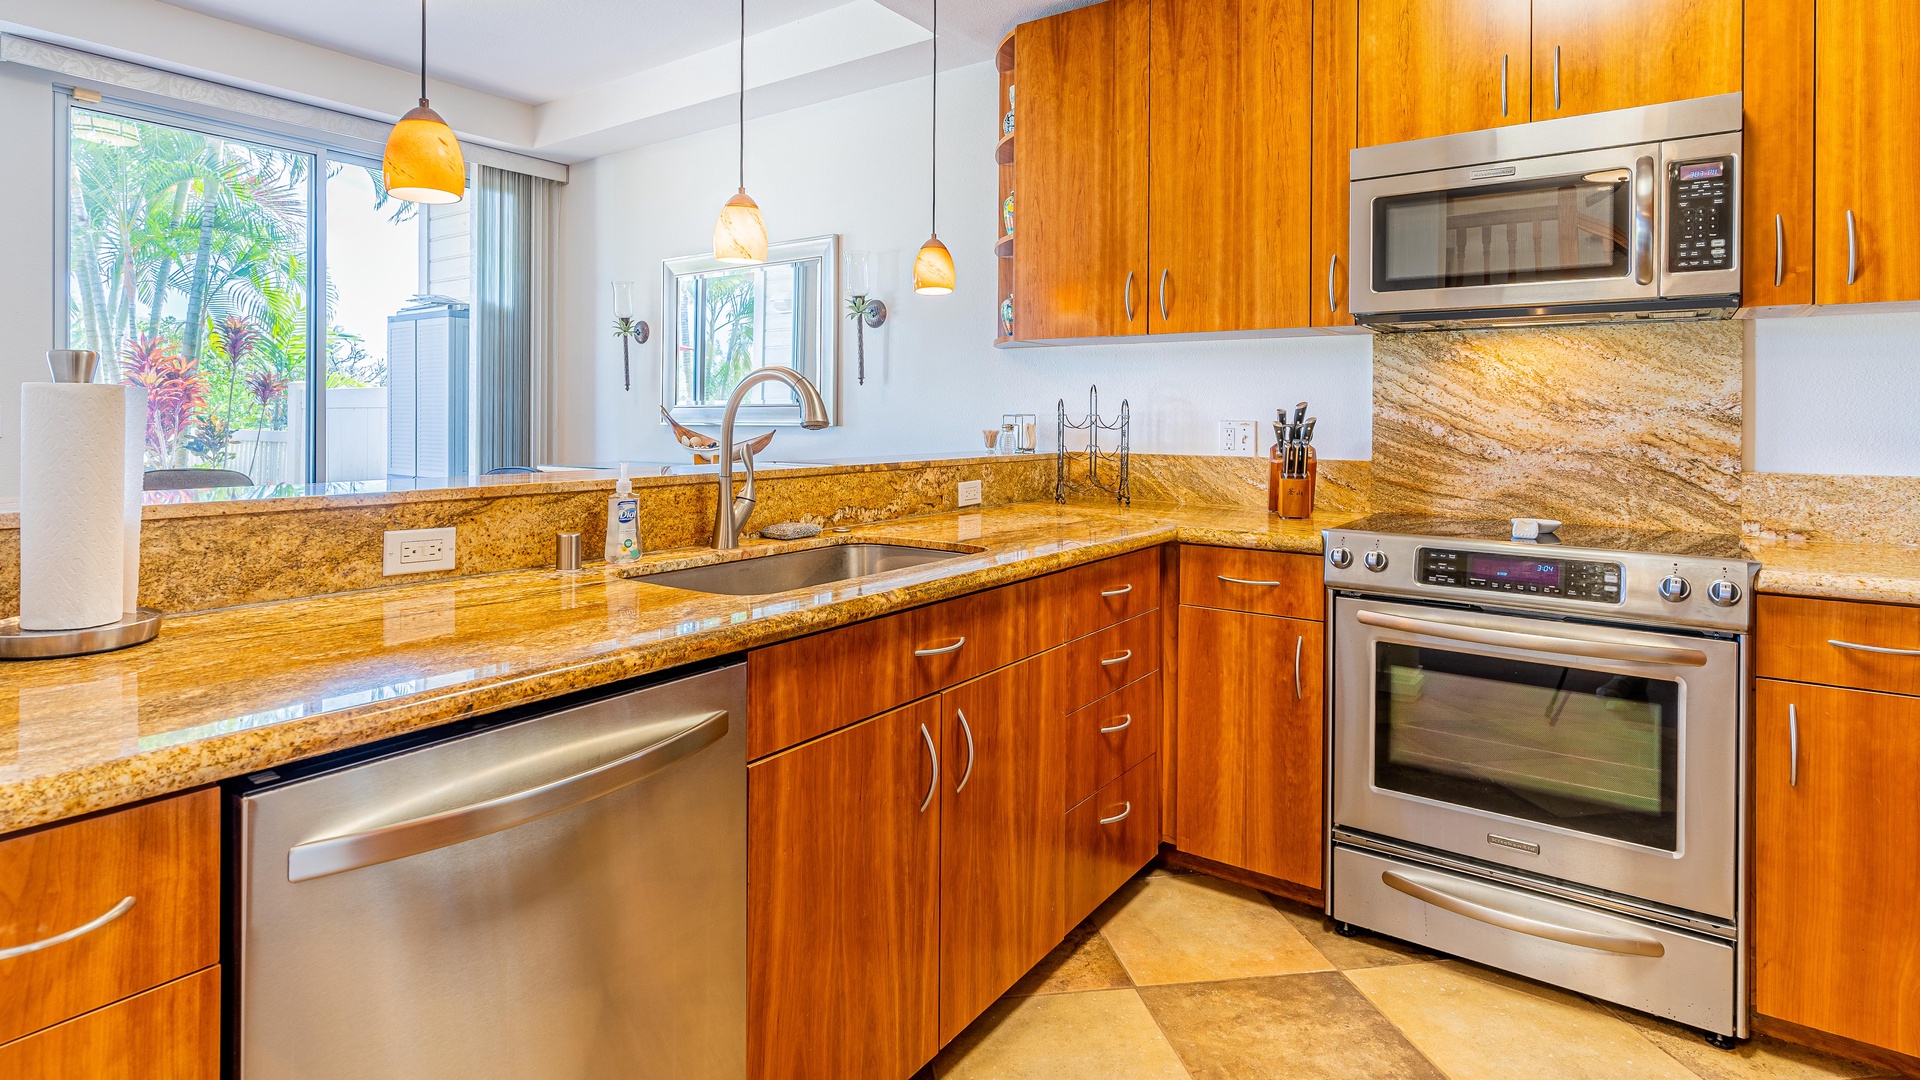 Kapolei Vacation Rentals, Fairways at Ko Olina 20G - This gorgeous kitchen features stainless steel appliances and a beautiful view.